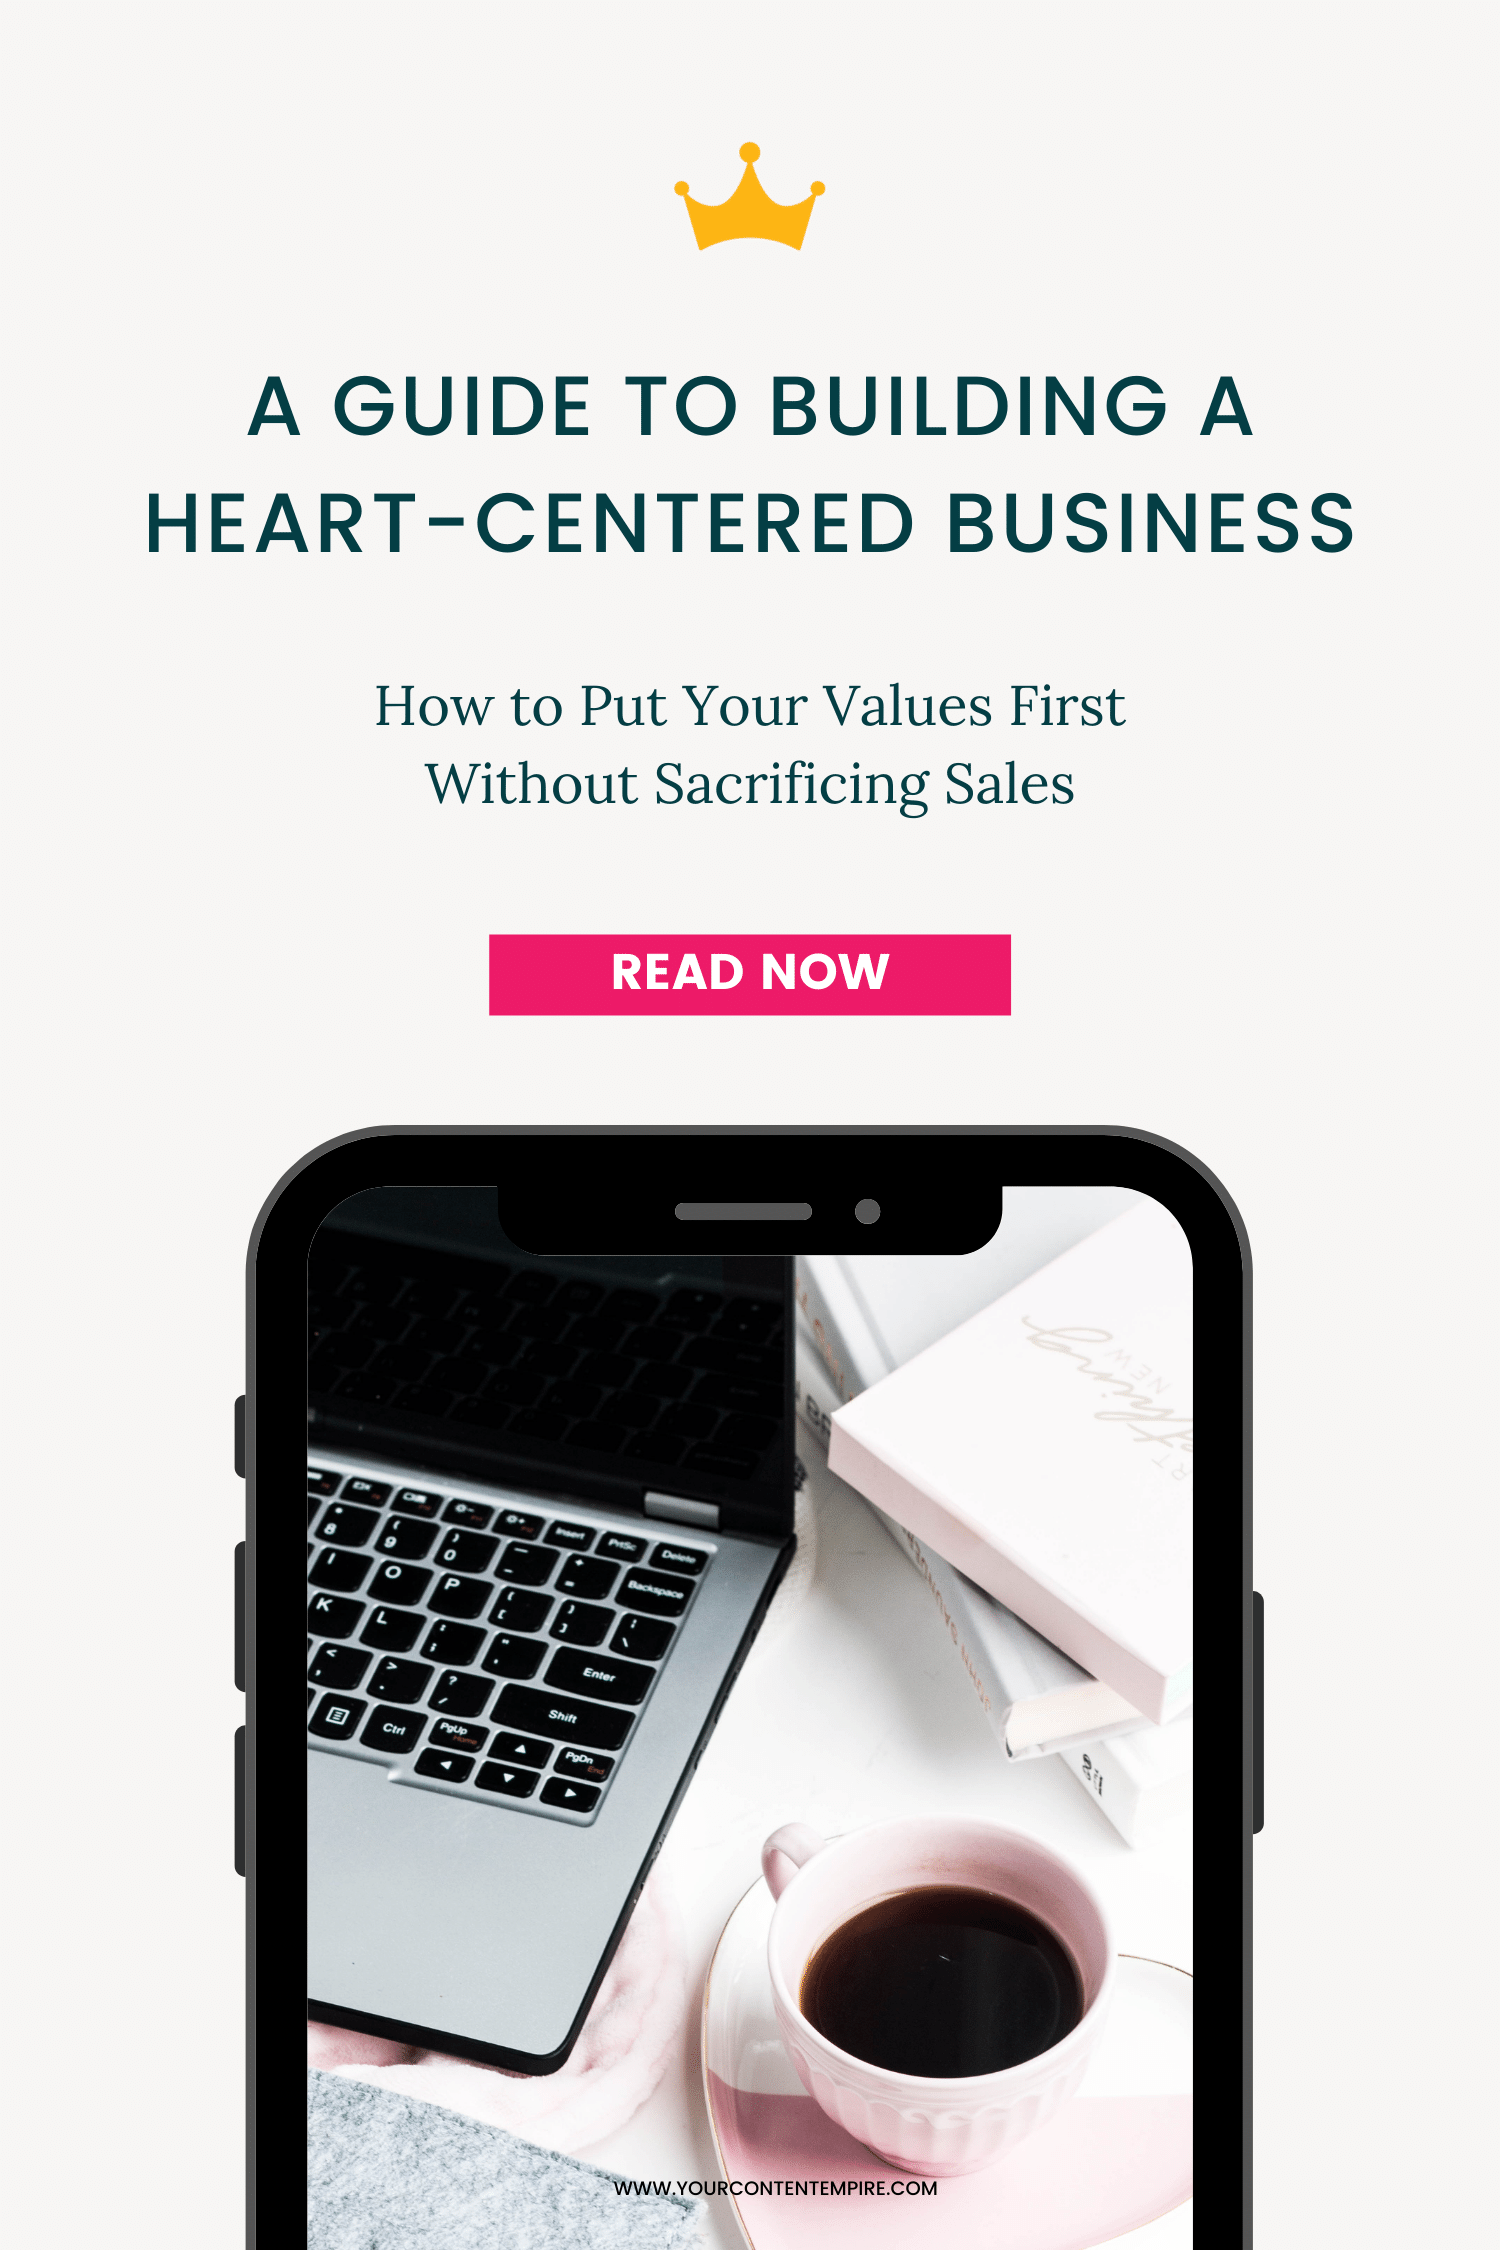 A Guide to Building a Heart-Centered Business